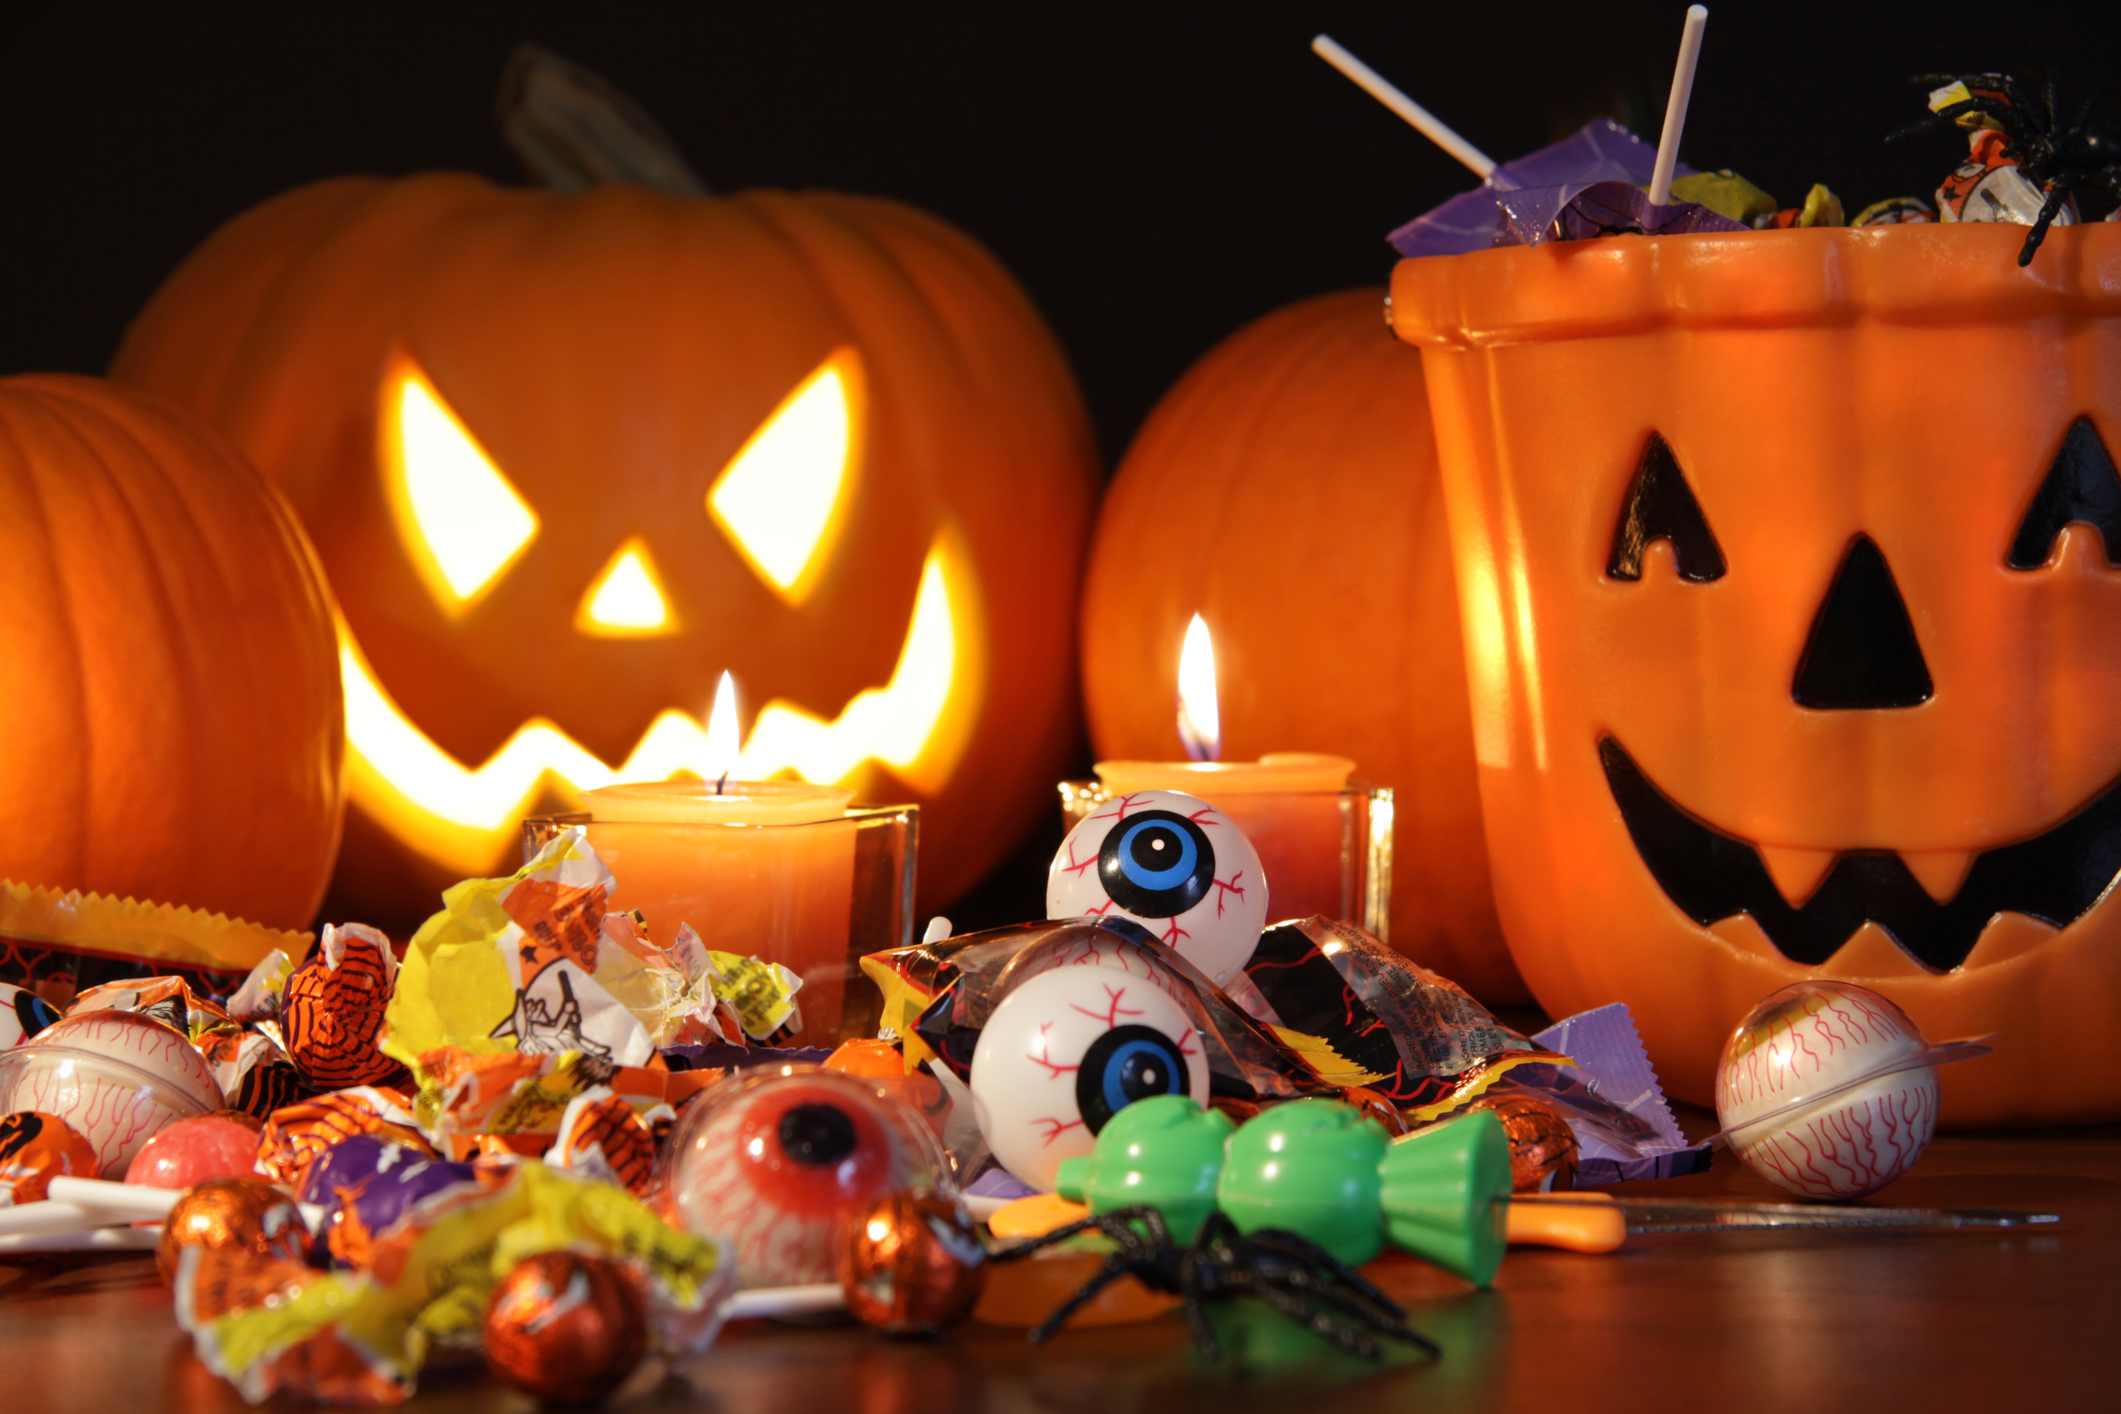 LIST Trickortreat times for Northeast Ohio communities 2016